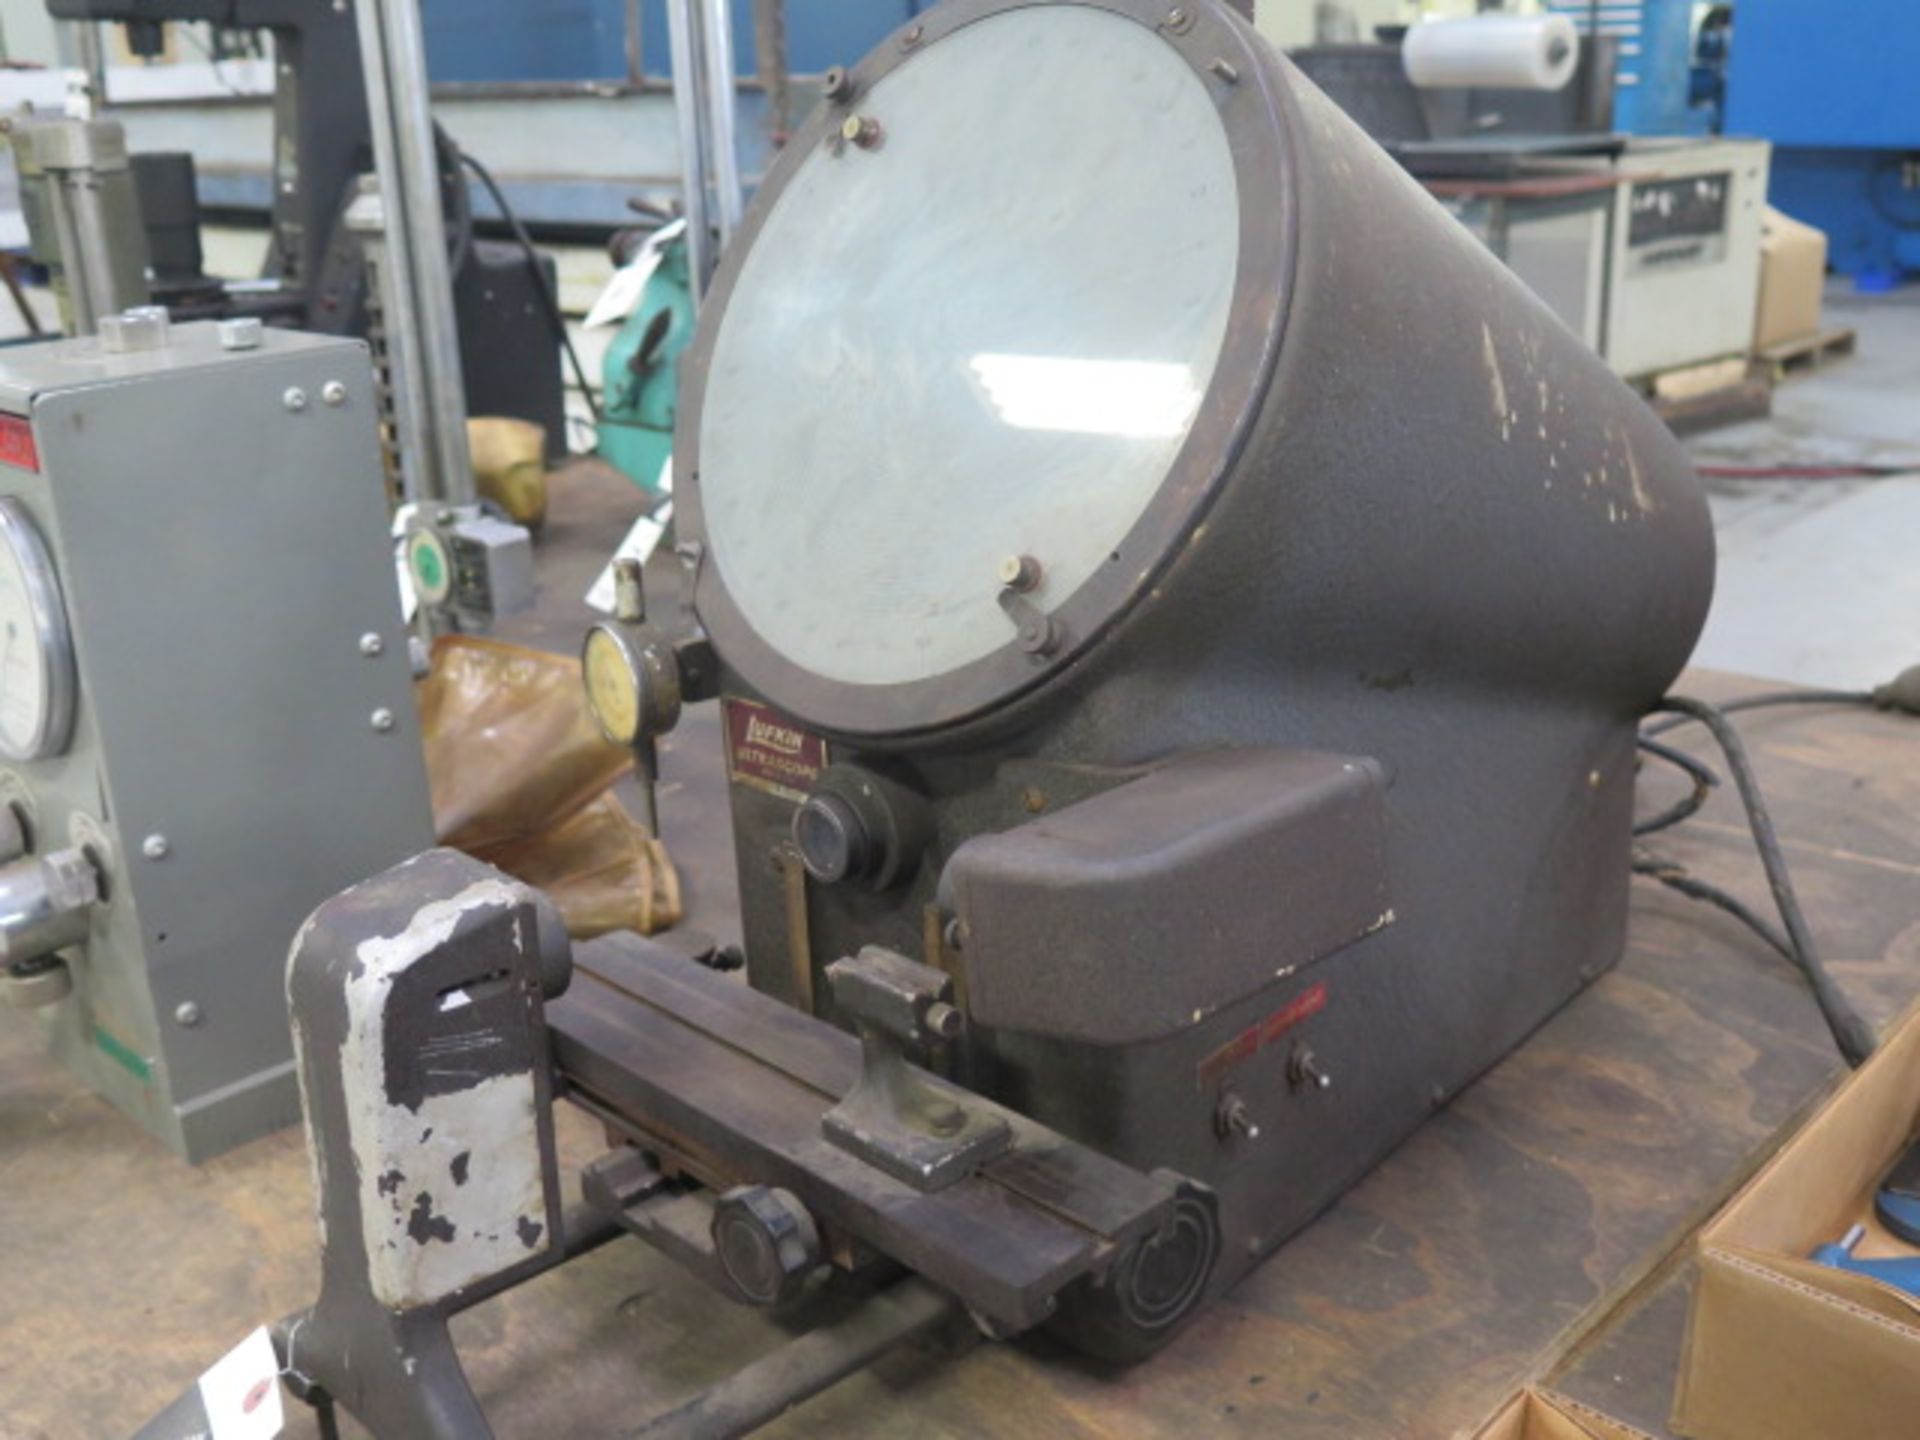 Lufkin mdl. 1200A 10" Bench Model Optical Comparator - Image 3 of 5